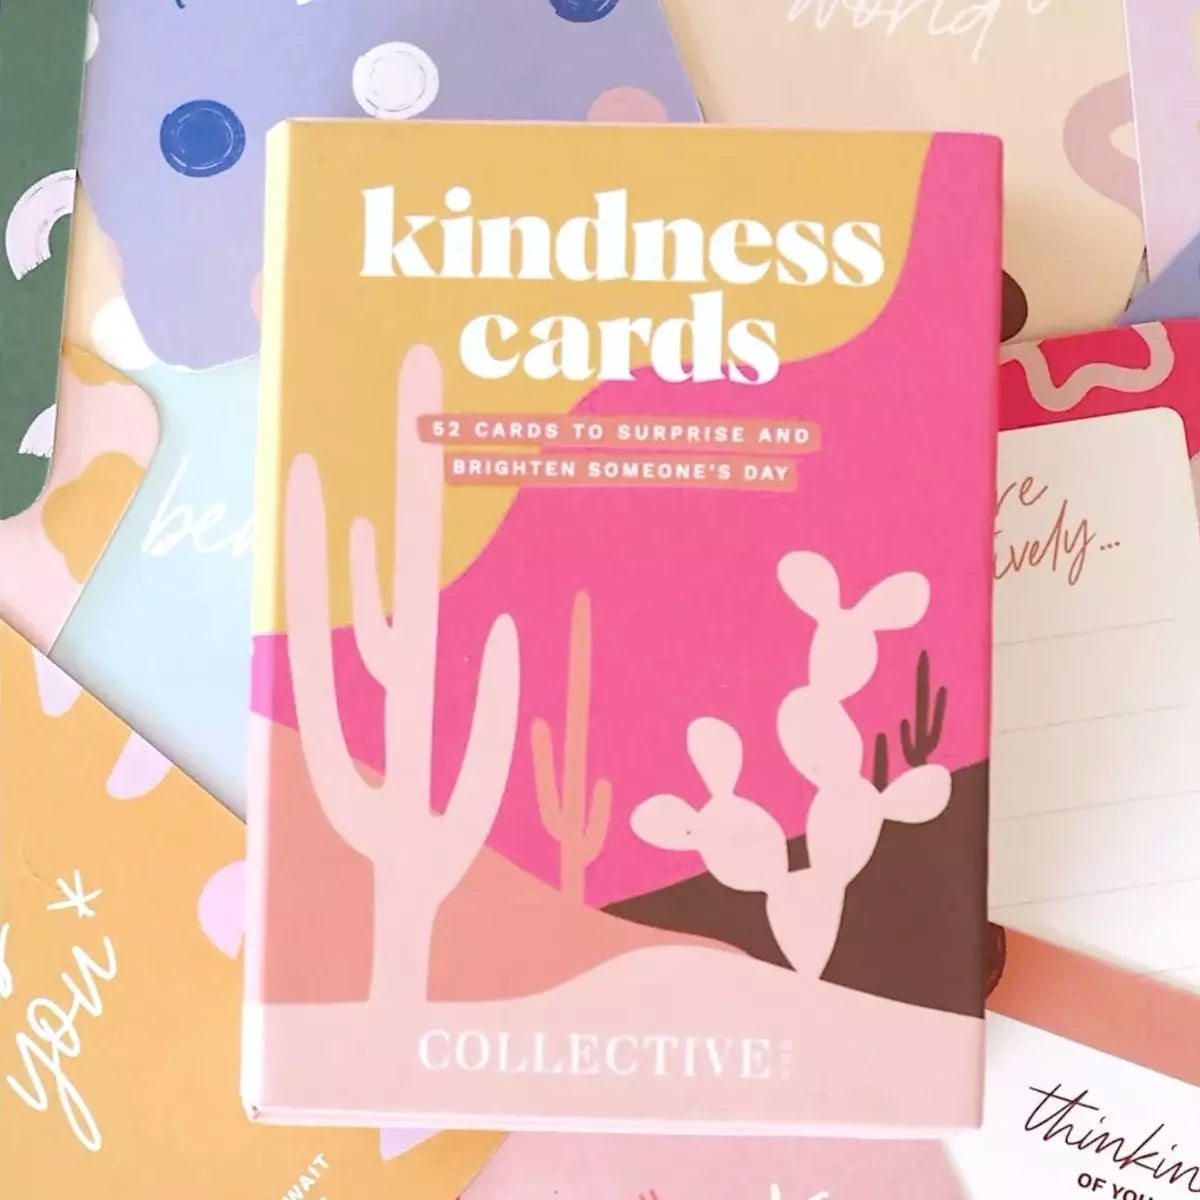 Surprise someone and brighten their day with Collective Hub's Kindness Cards. Our collective is dedicated to spreading smiles and love through these unique and thoughtful cards.